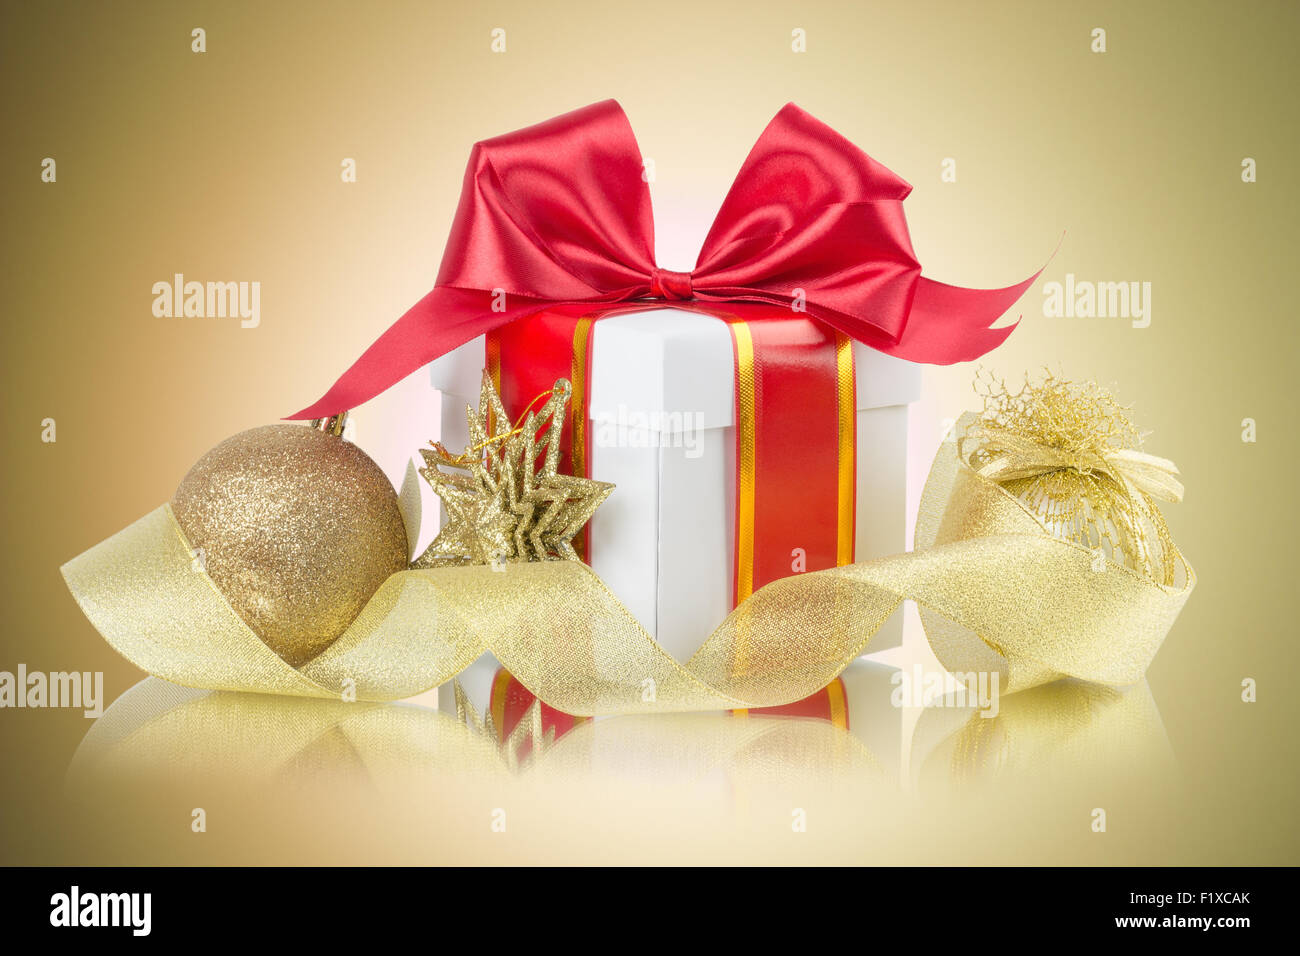 gift box with bow and christmas balls. Stock Photo